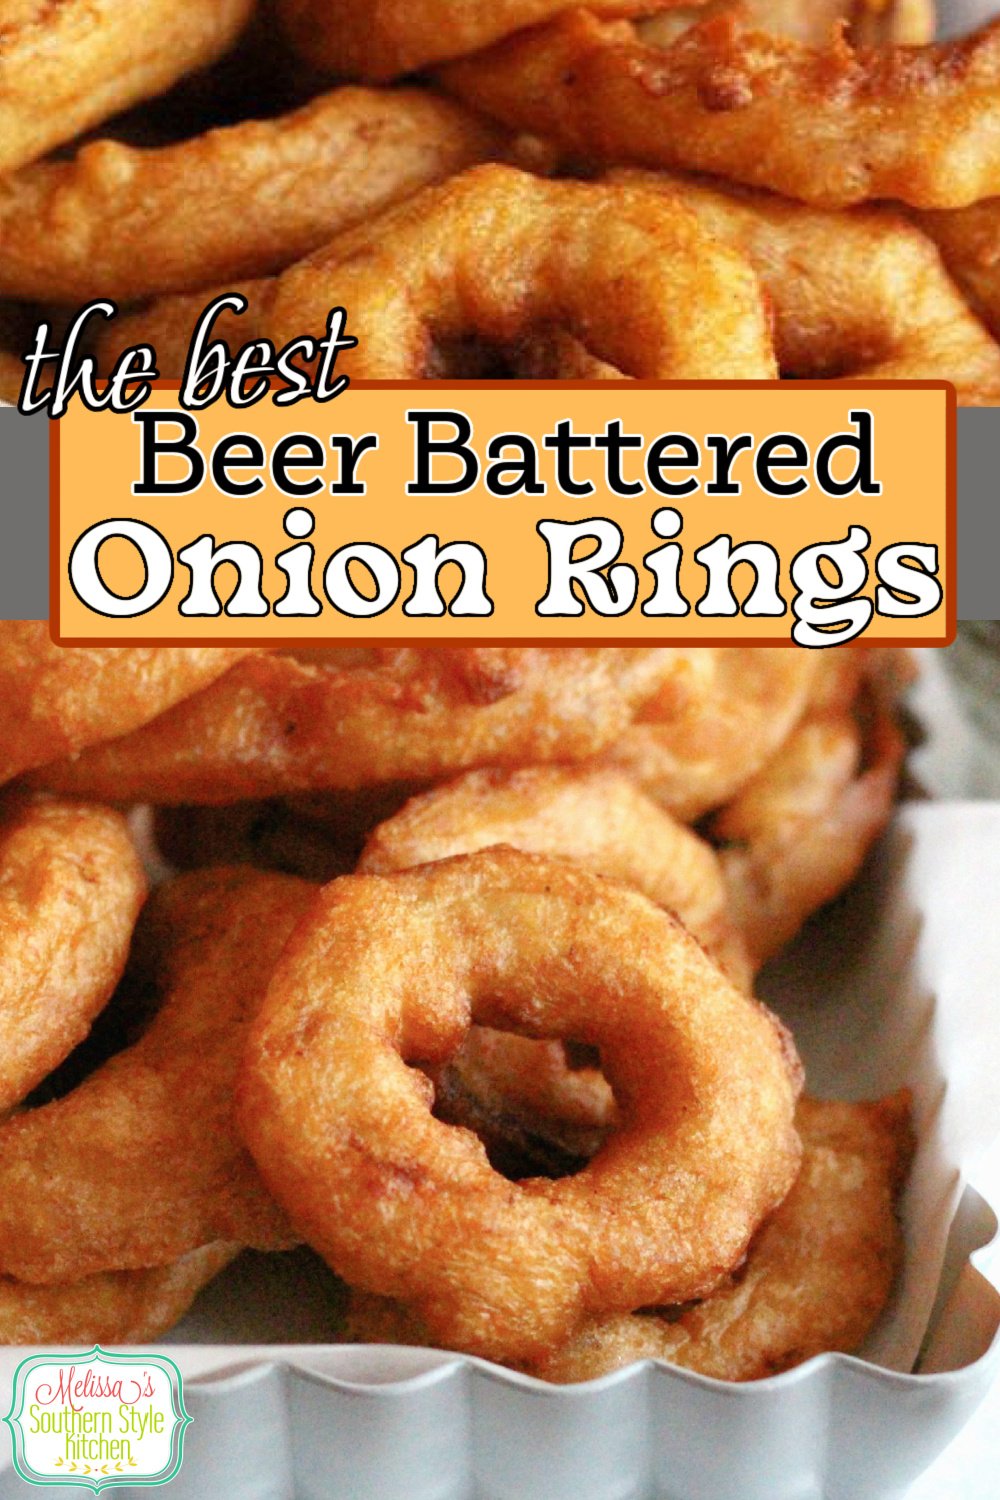 Serve these crispy Beer Battered Onion Rings as an appetizer, piled high on a burger or as a side dish #onionrings #deepfriedonionrings #beerbatteredonionrings #beer #beerbatter #onions #appetizers #partyfood #footballfood #sidedish #southernfood #southernrecipes